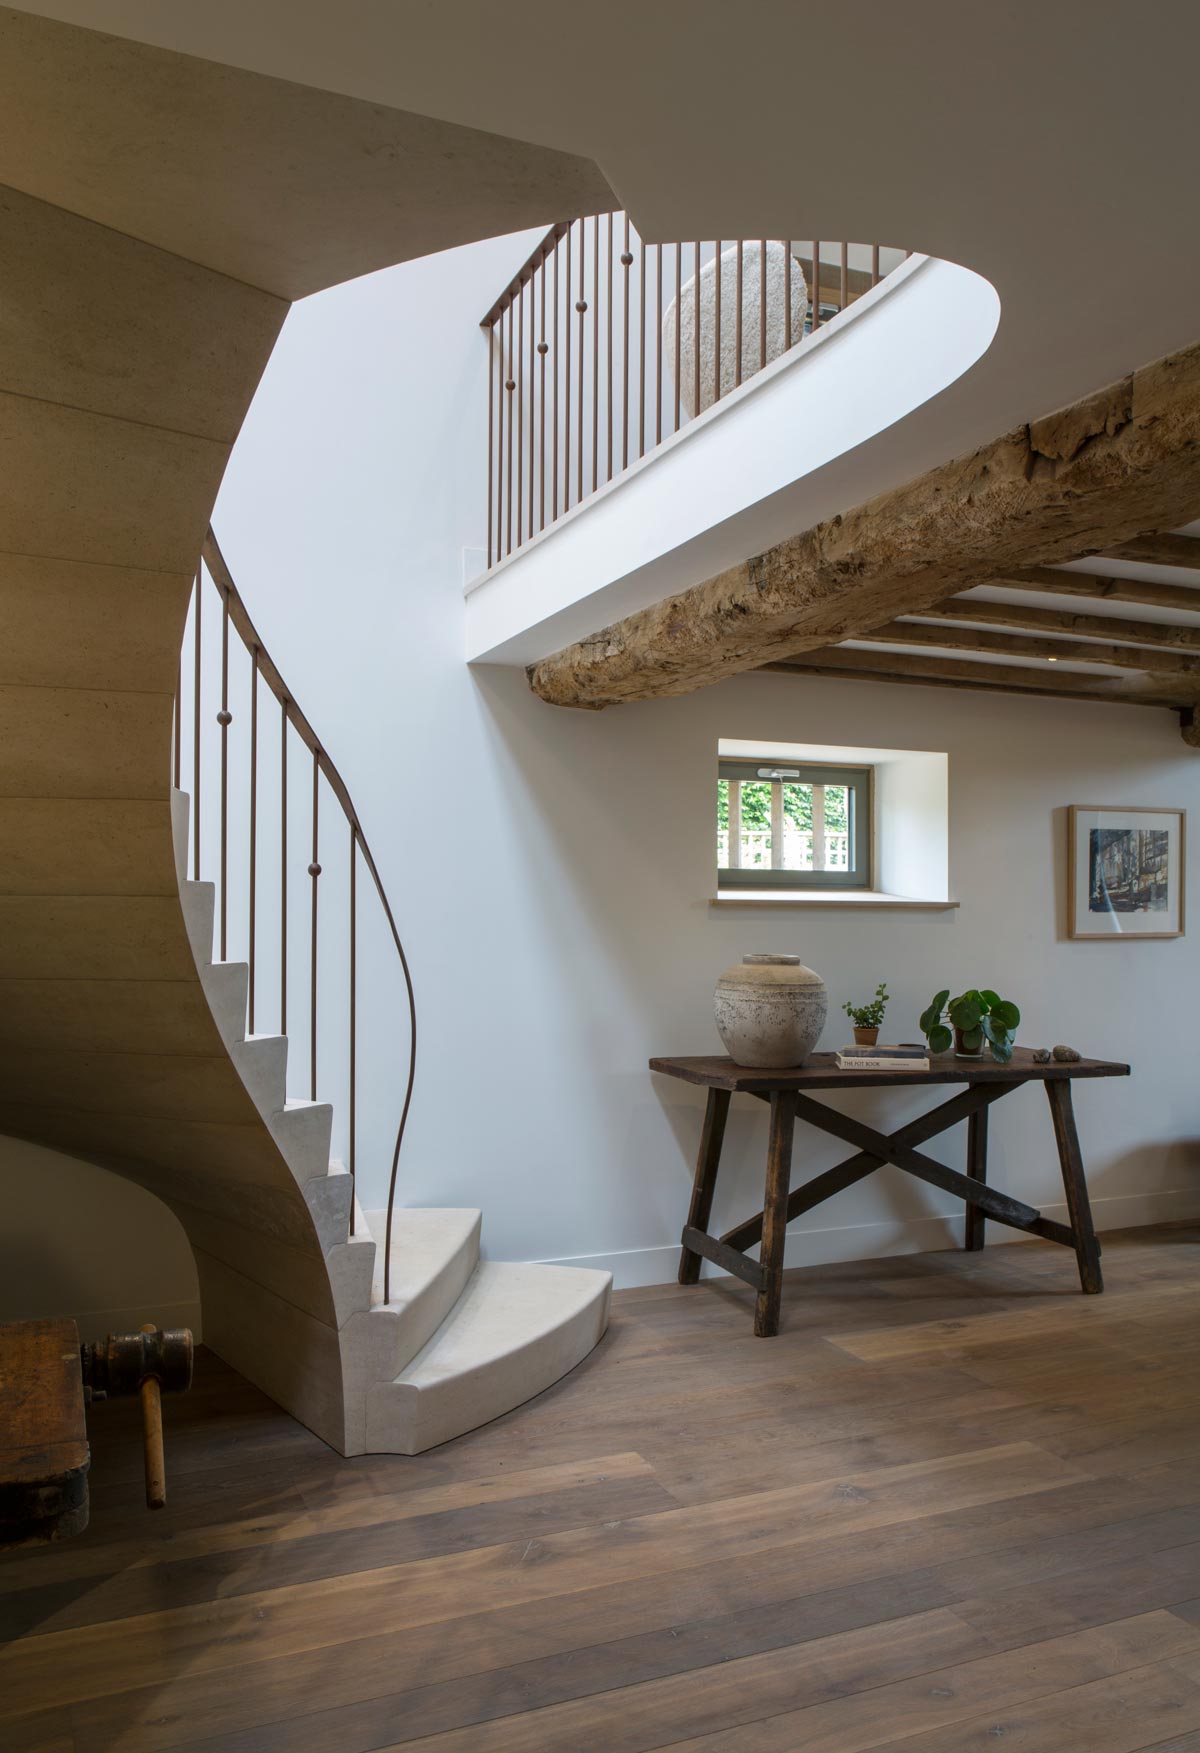 sculptural-curved-limestone-staircase-5-oxfordshire-rogue-designs-ian-knapper.jpg